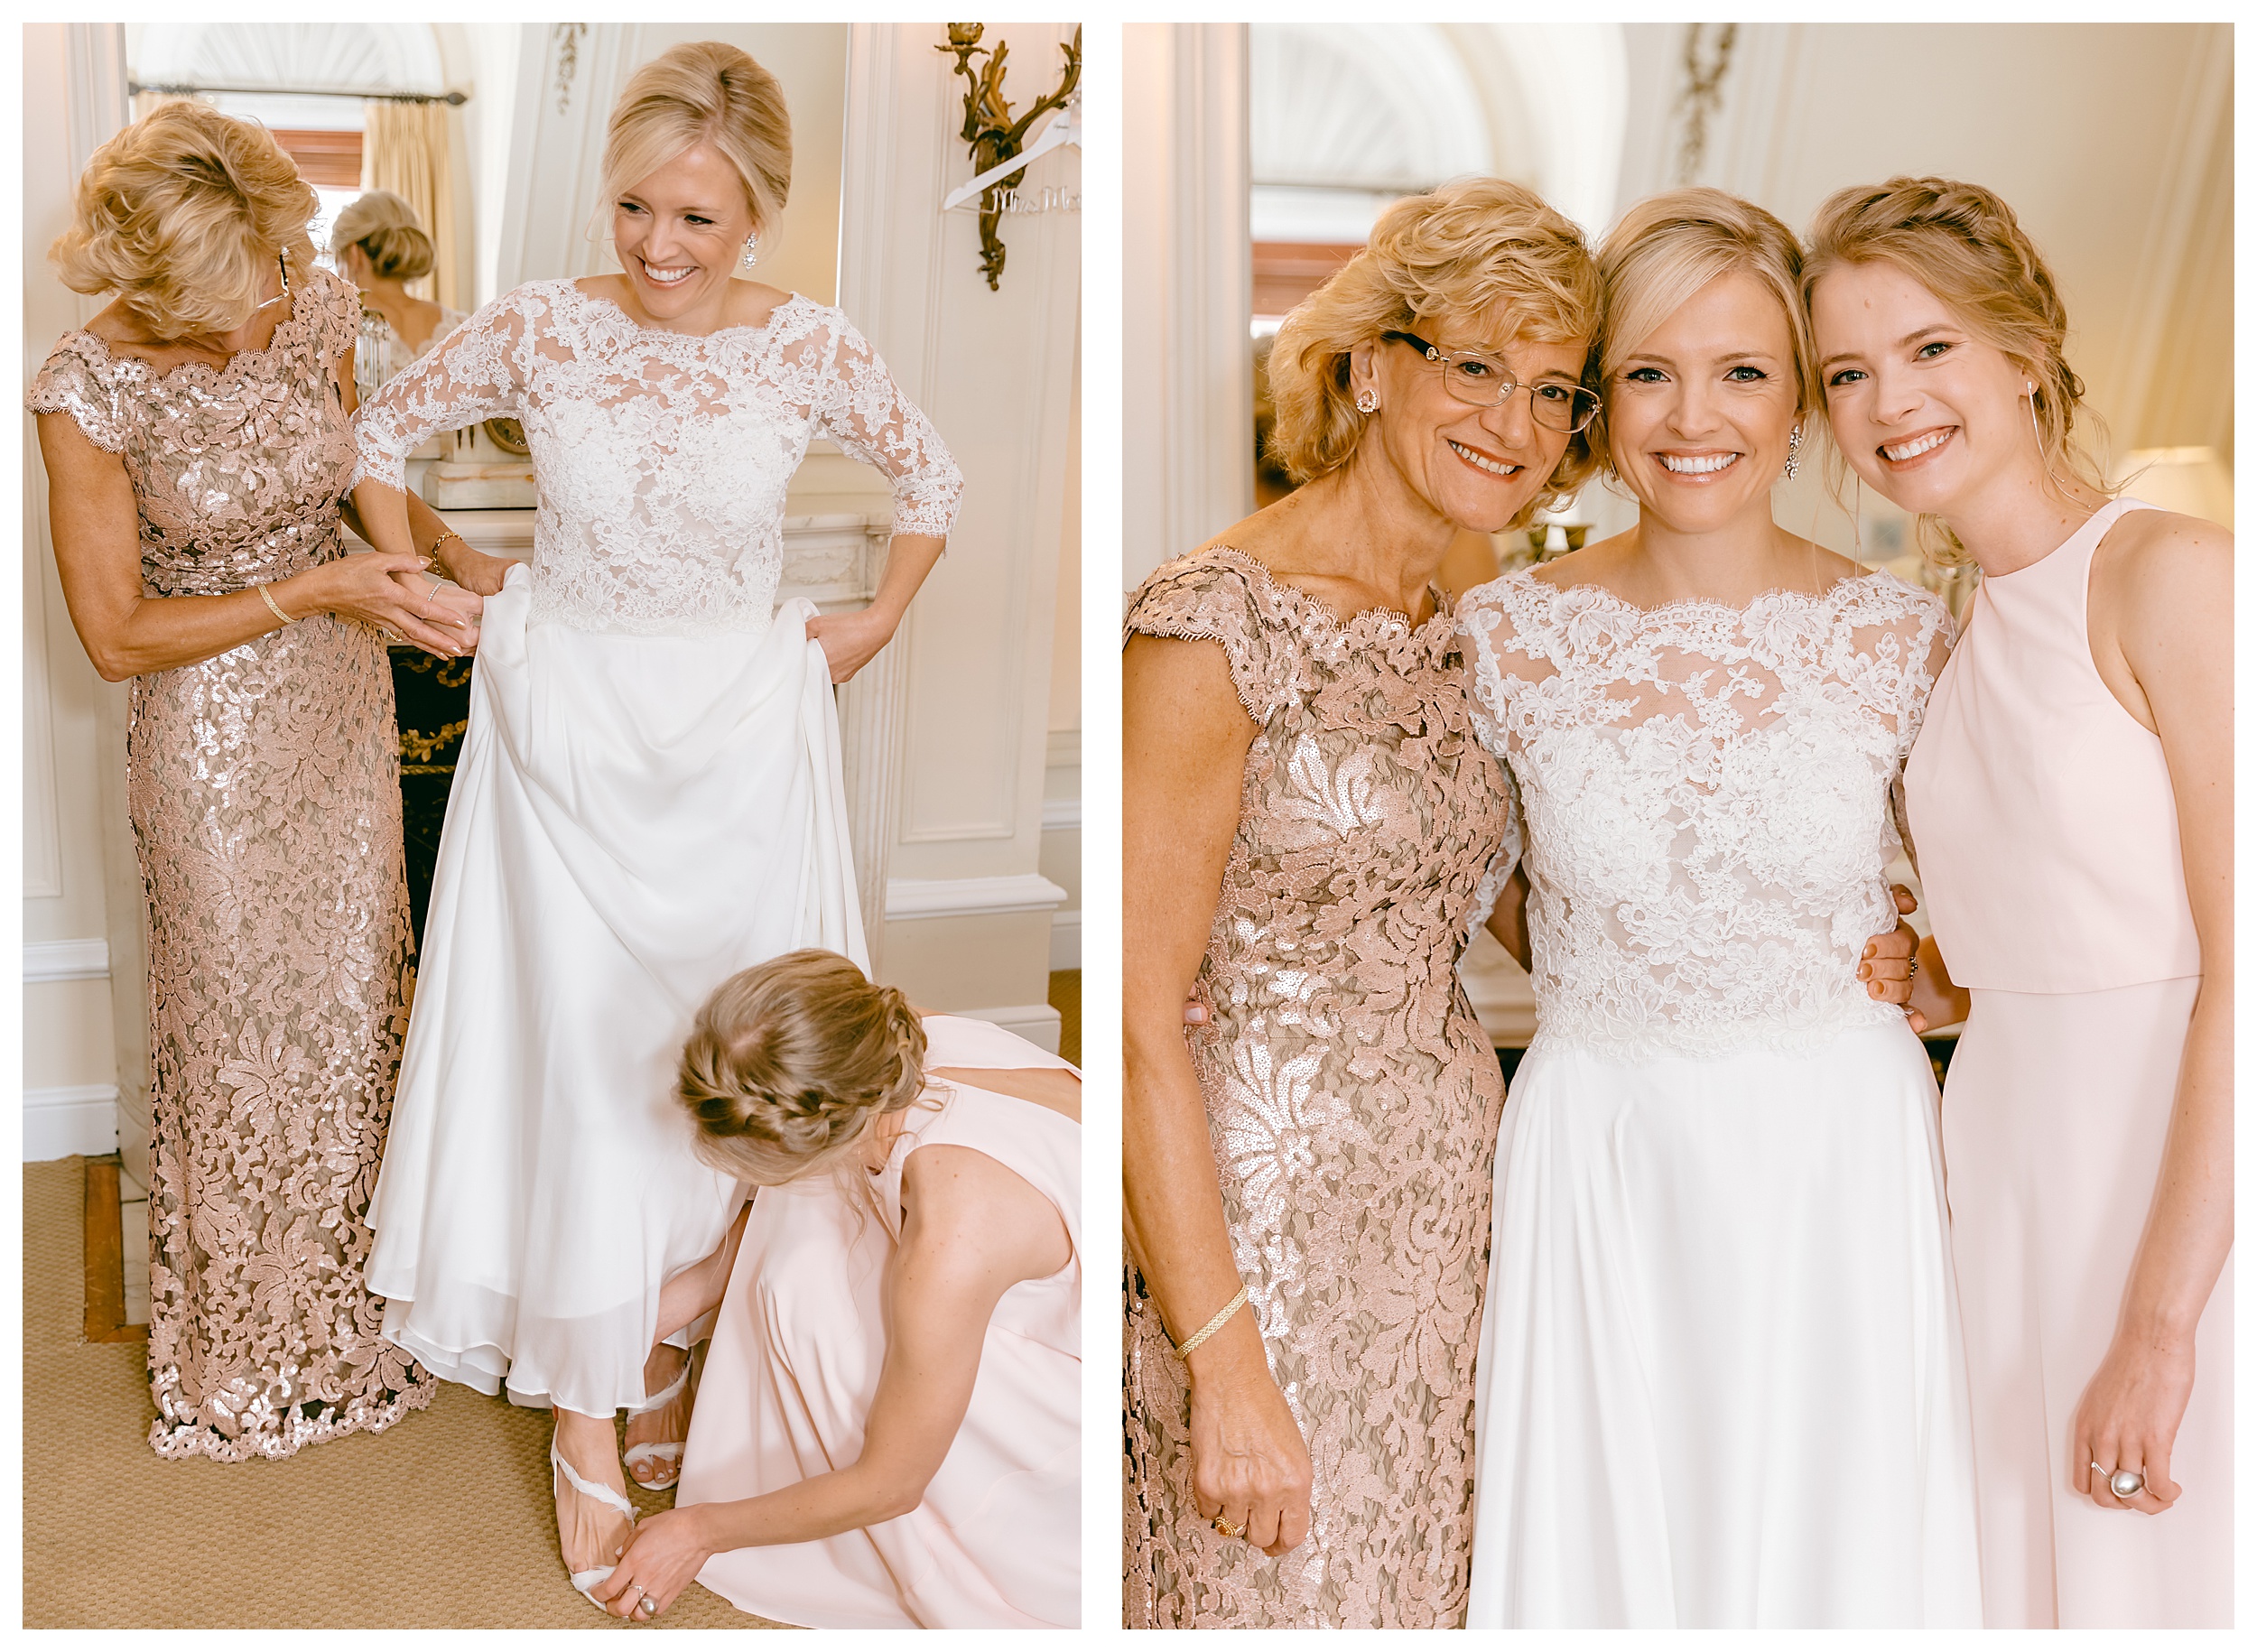 getting ready lace dress bride and mom